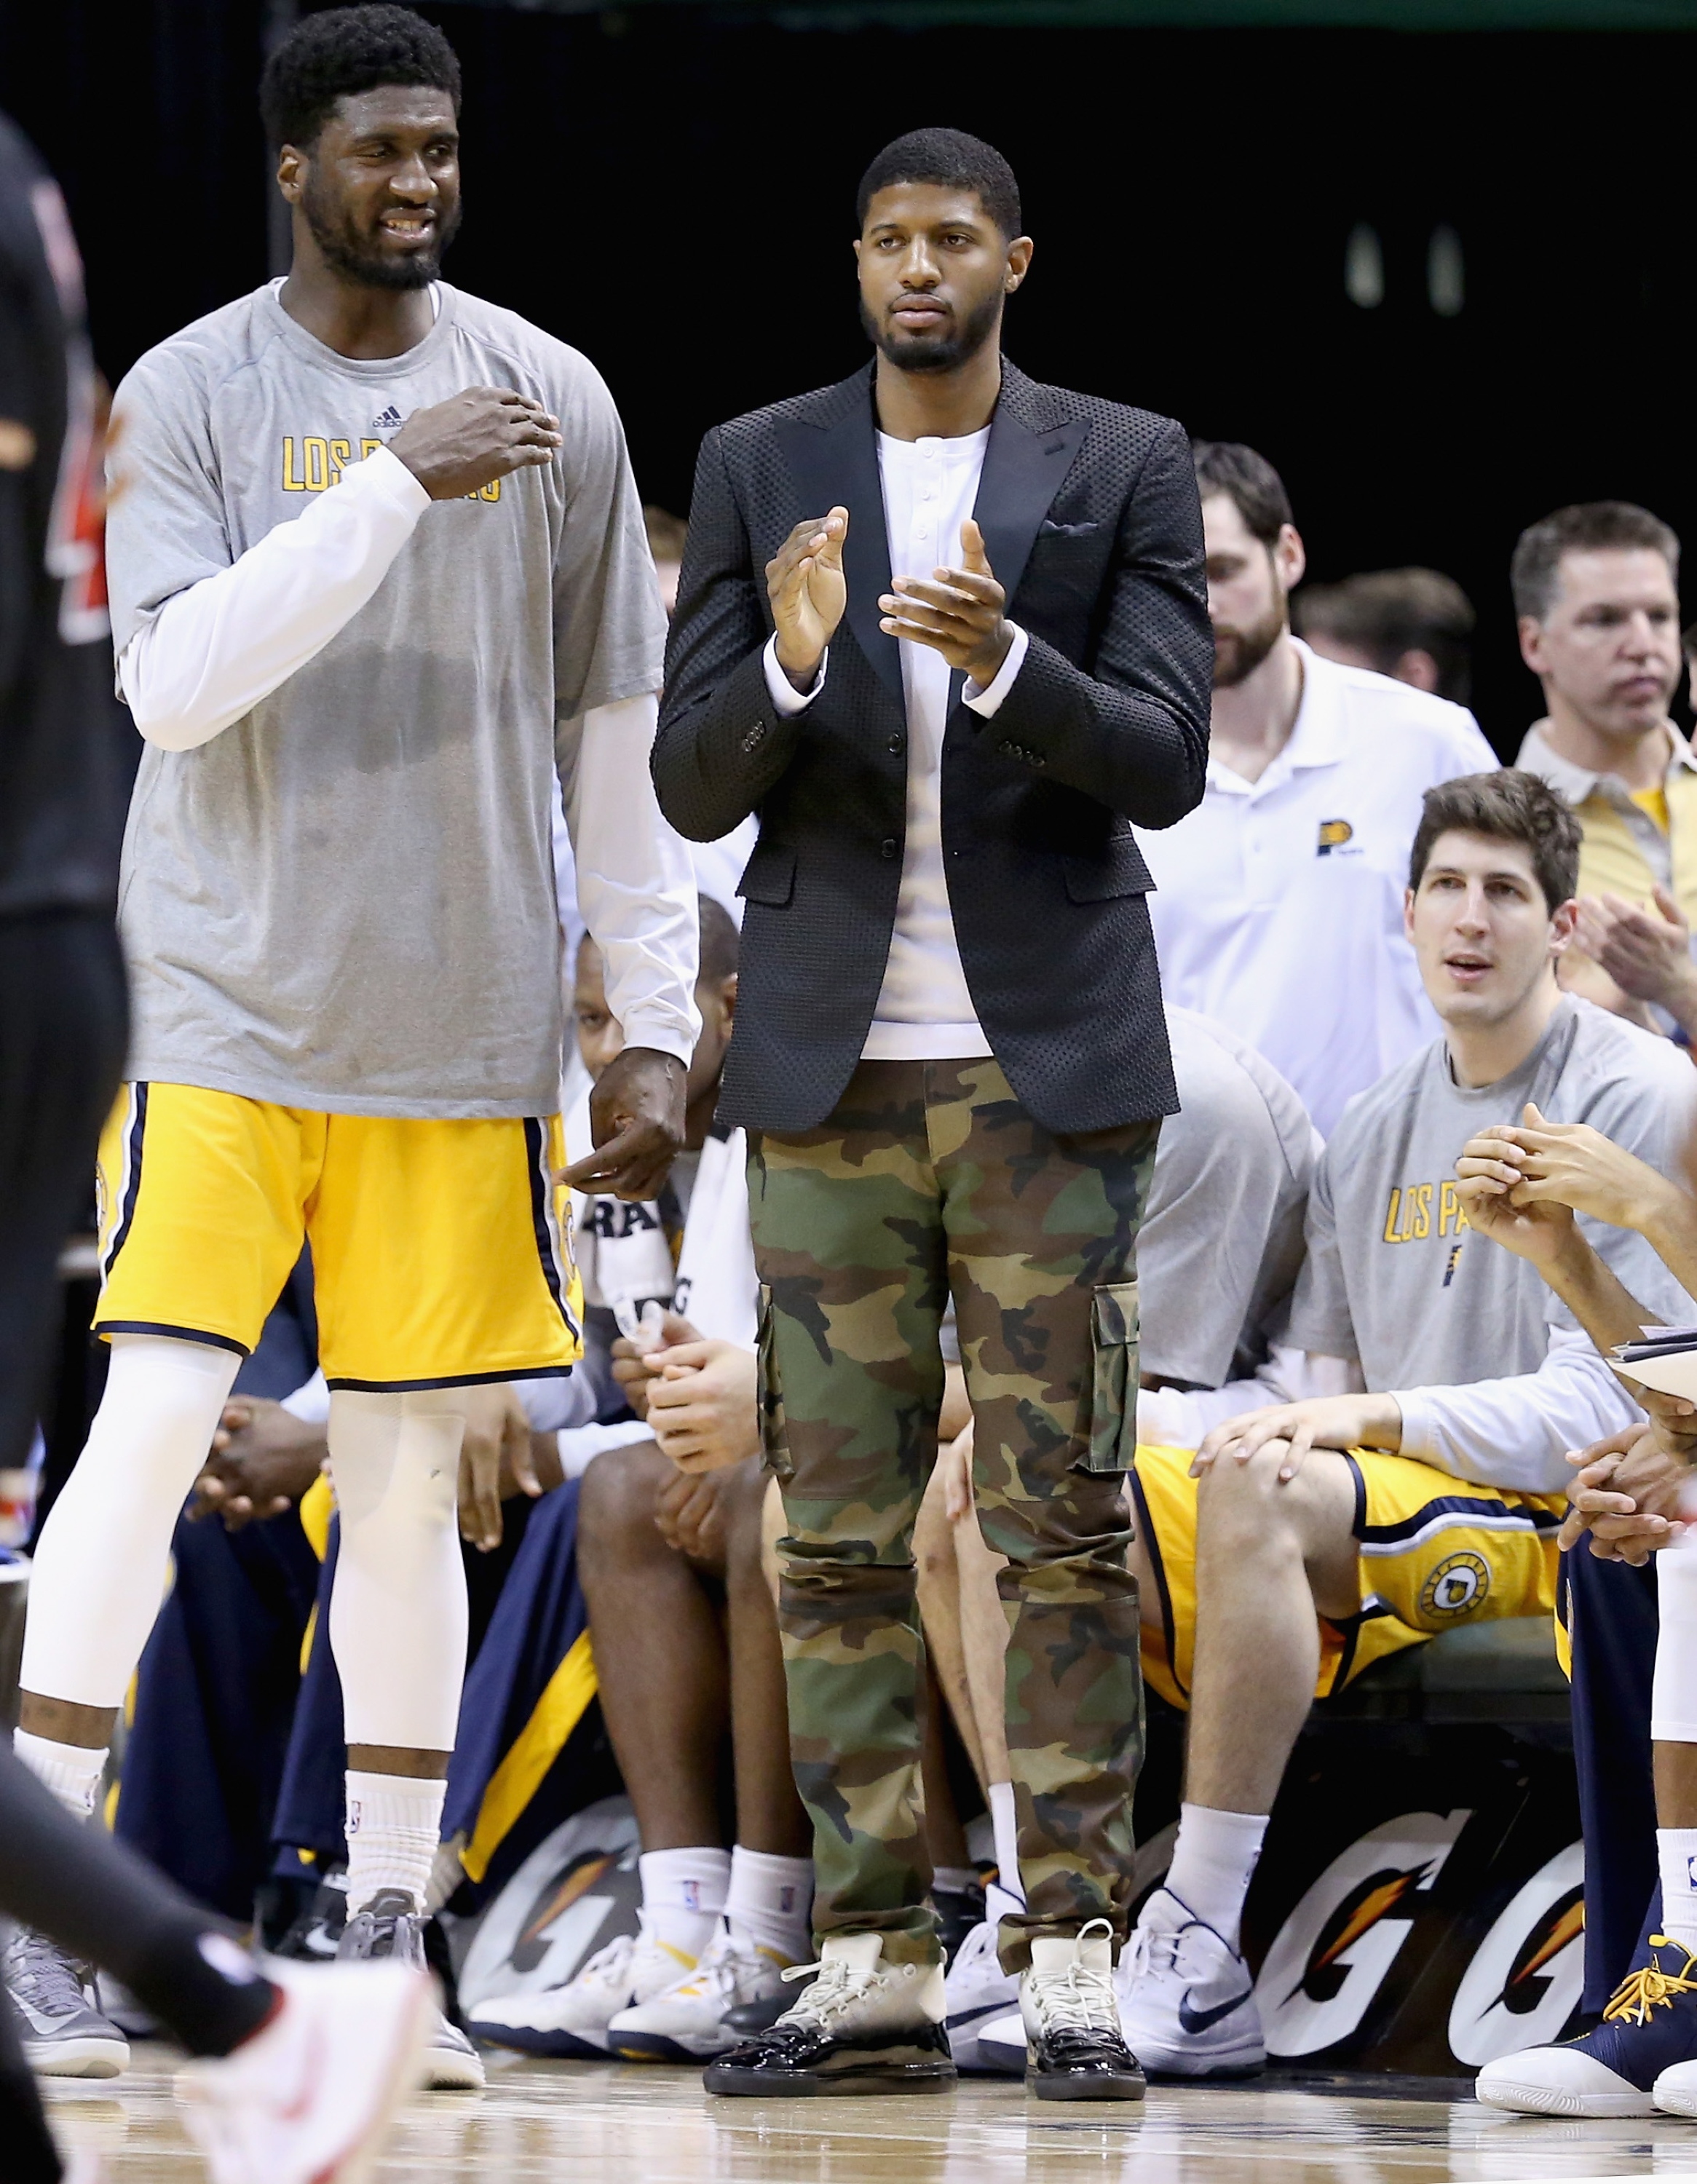 Paul George applauds his team's effort. (Photo by Andy Lyons/Getty Images)